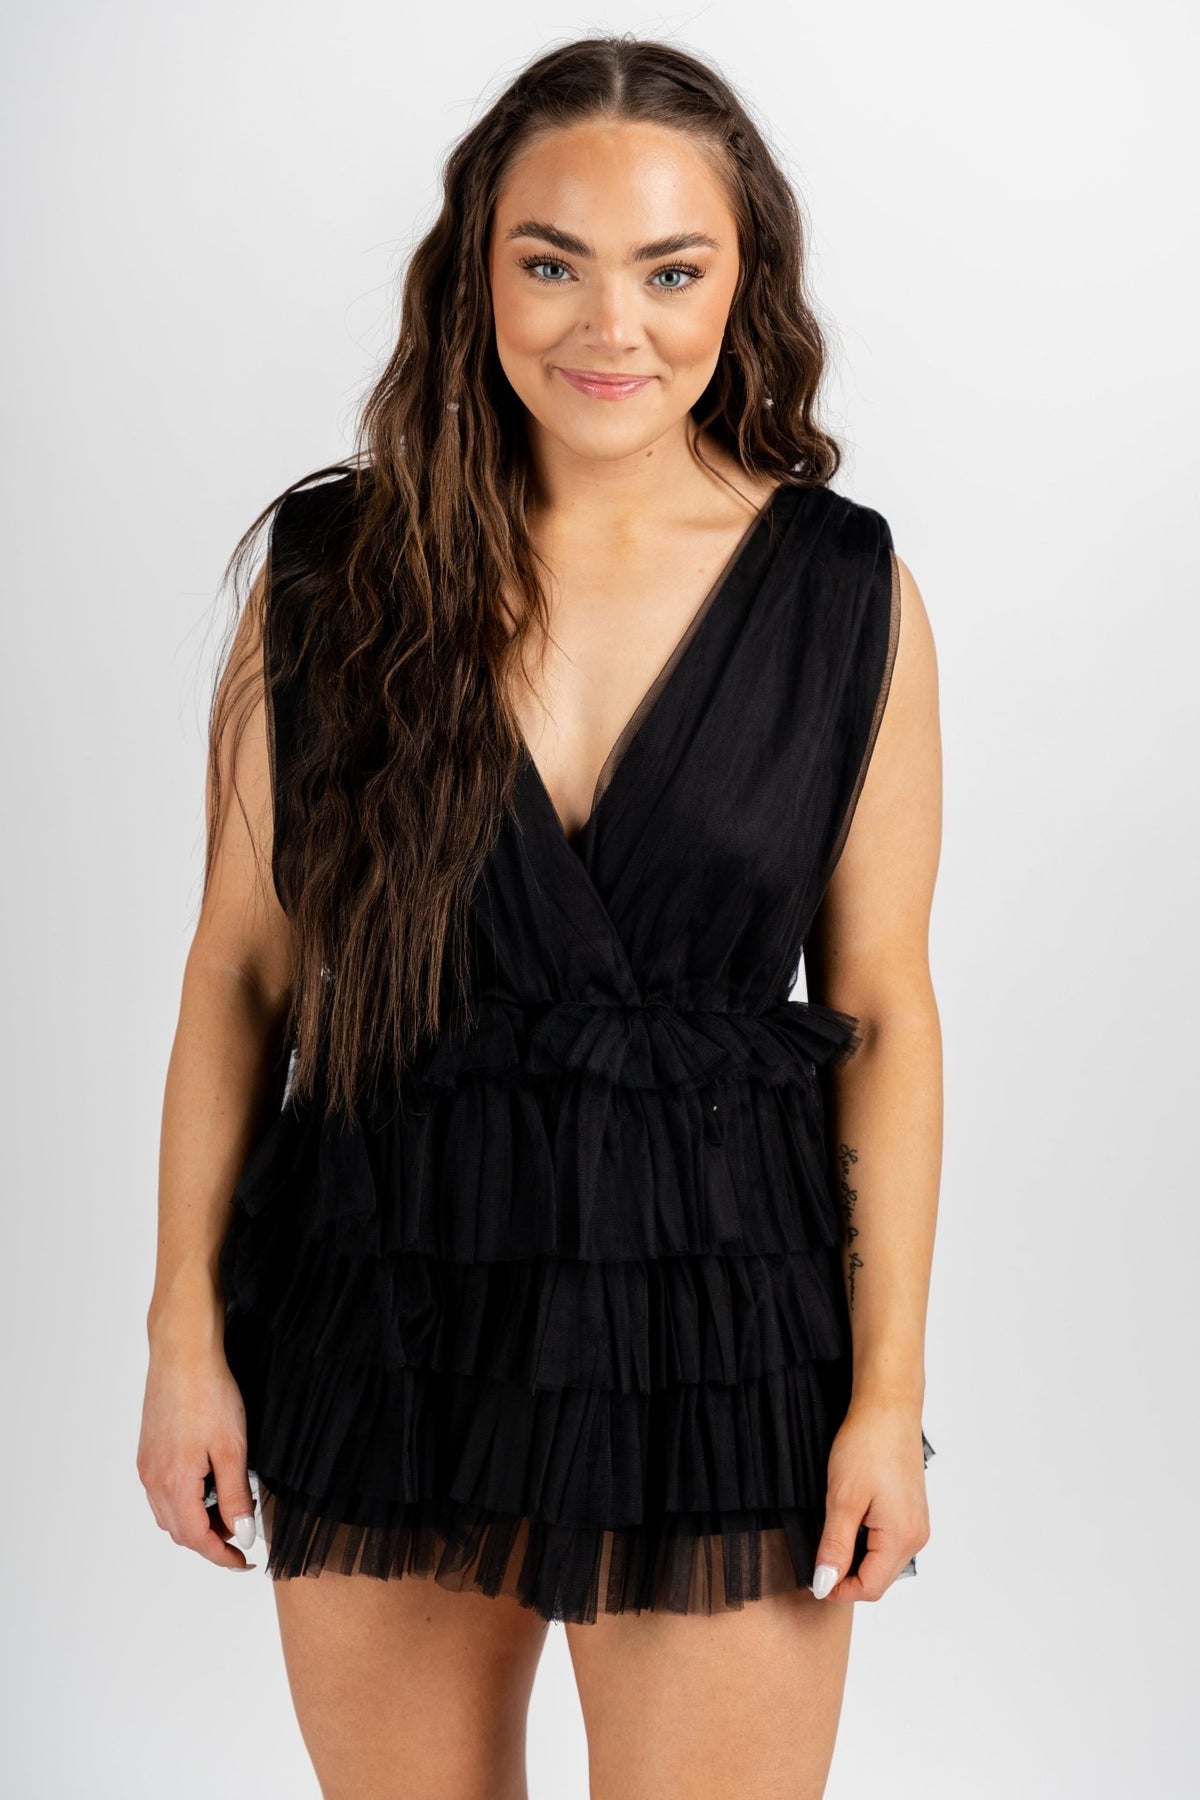 Tulle deep v romper black - Cute Romper - Trendy Rompers and Pantsuits at Lush Fashion Lounge Boutique in Oklahoma City